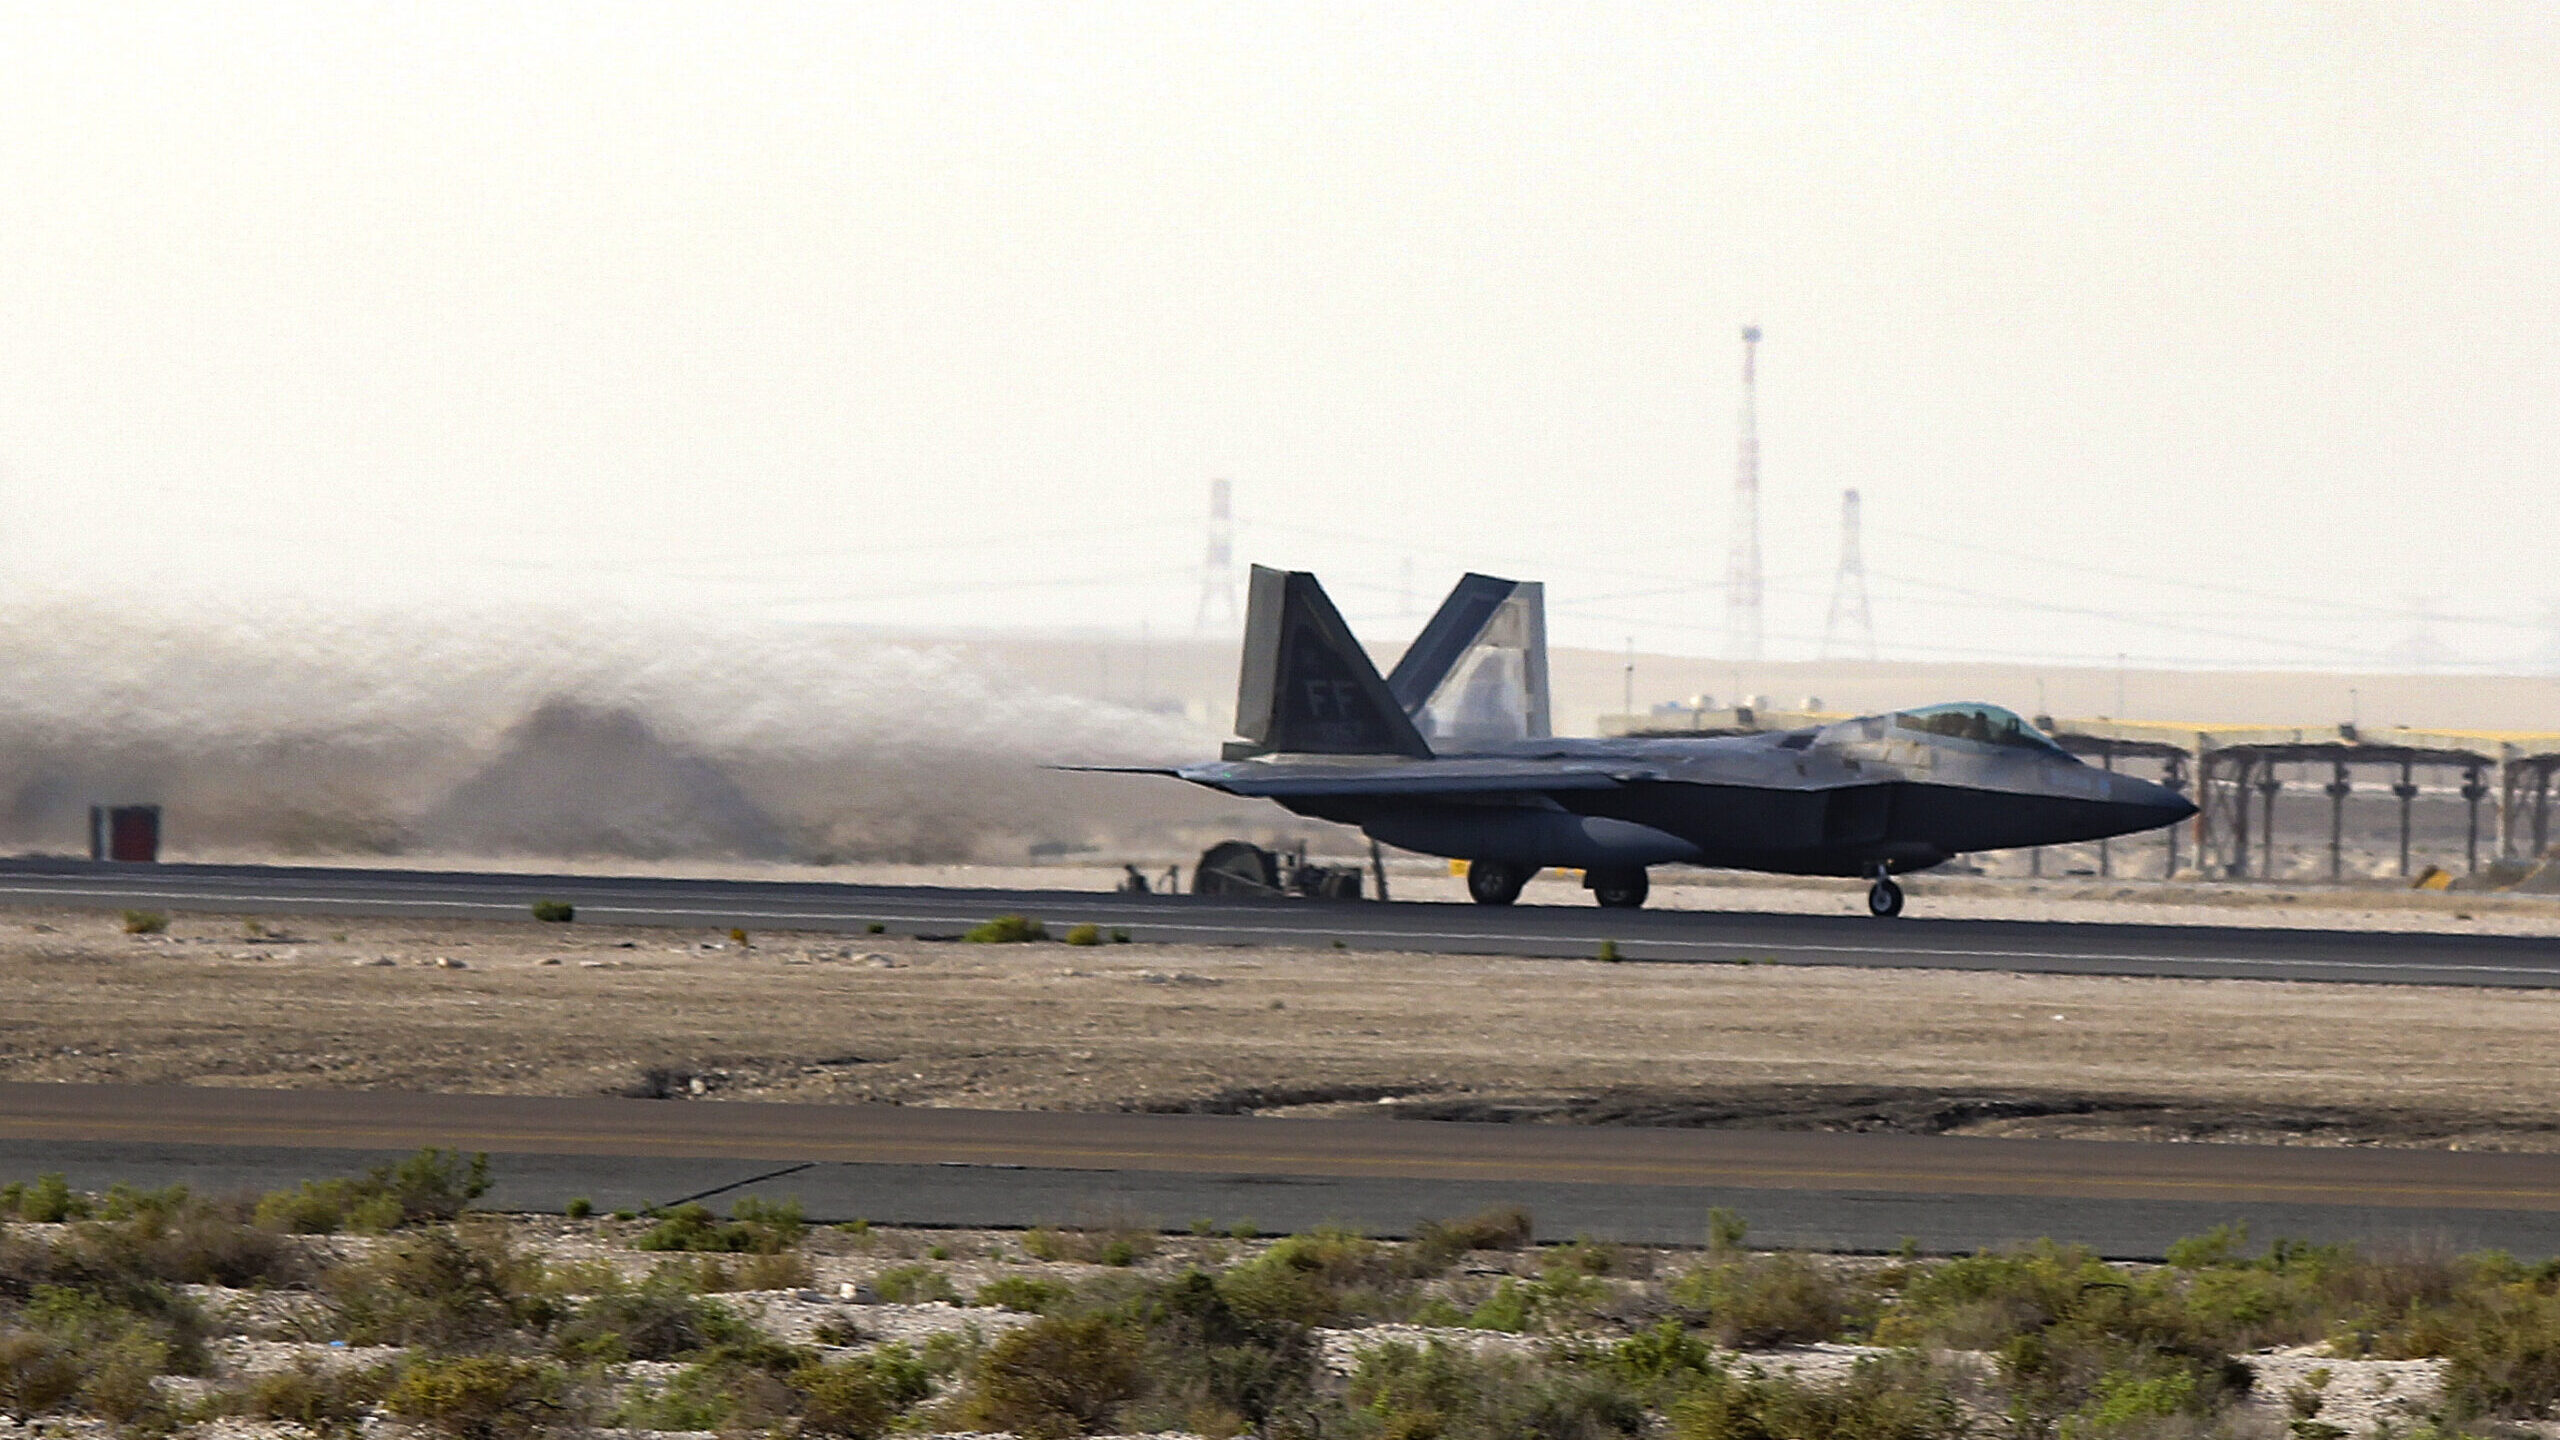 Will Sixth-generation NGAD Be Able To Out-Perform Upgraded F-22s